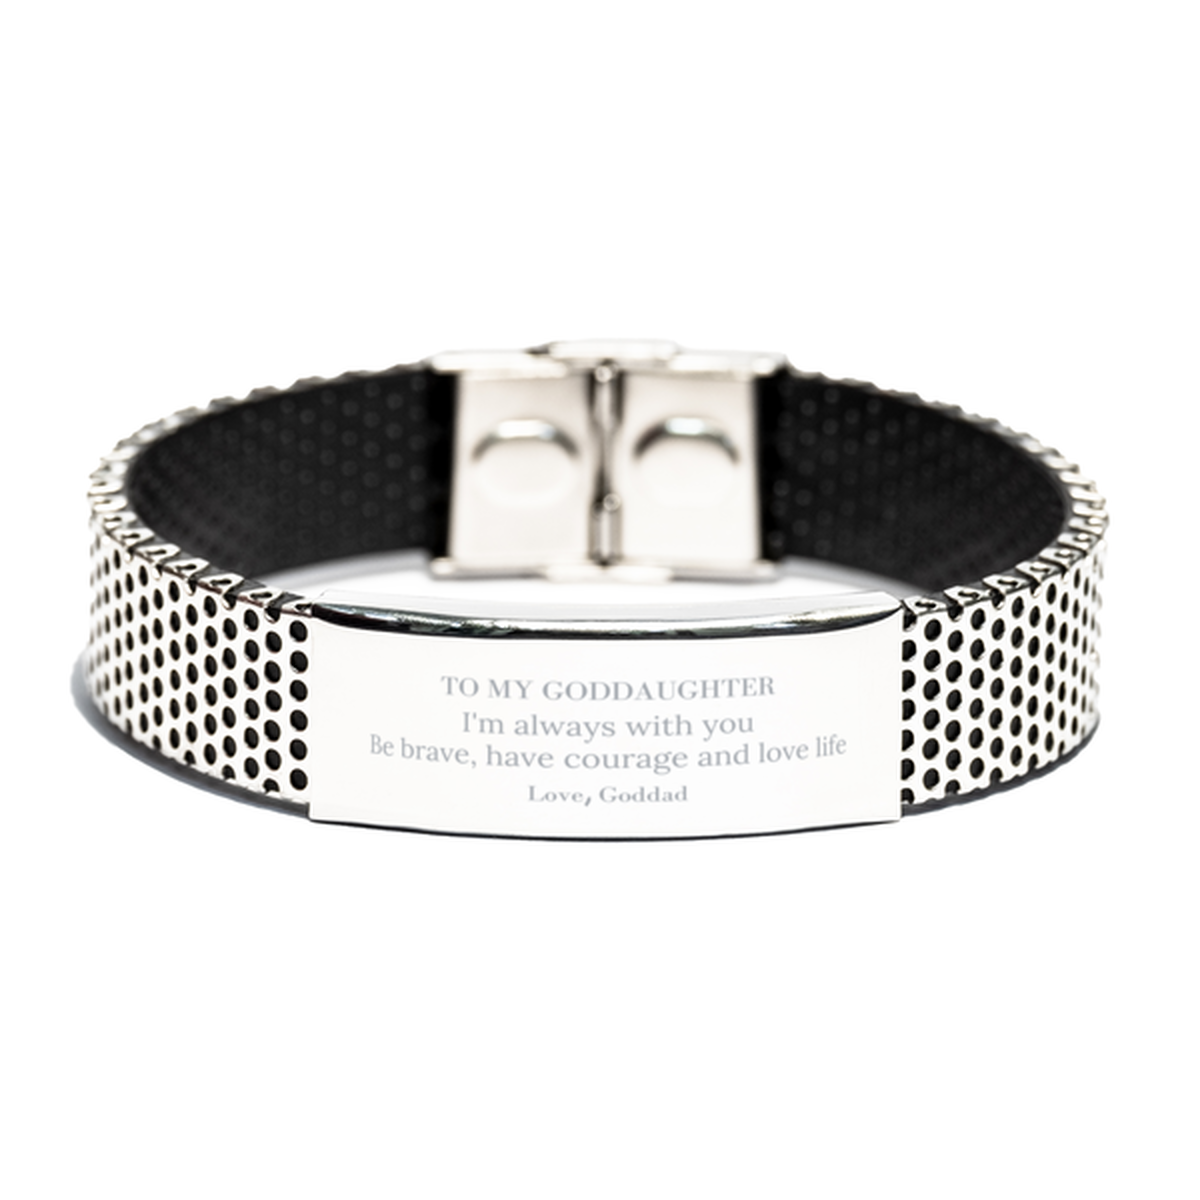 To My Goddaughter Gifts from Goddad, Unique Stainless Steel Bracelet Inspirational Christmas Birthday Graduation Gifts for Goddaughter I'm always with you. Be brave, have courage and love life. Love, Goddad